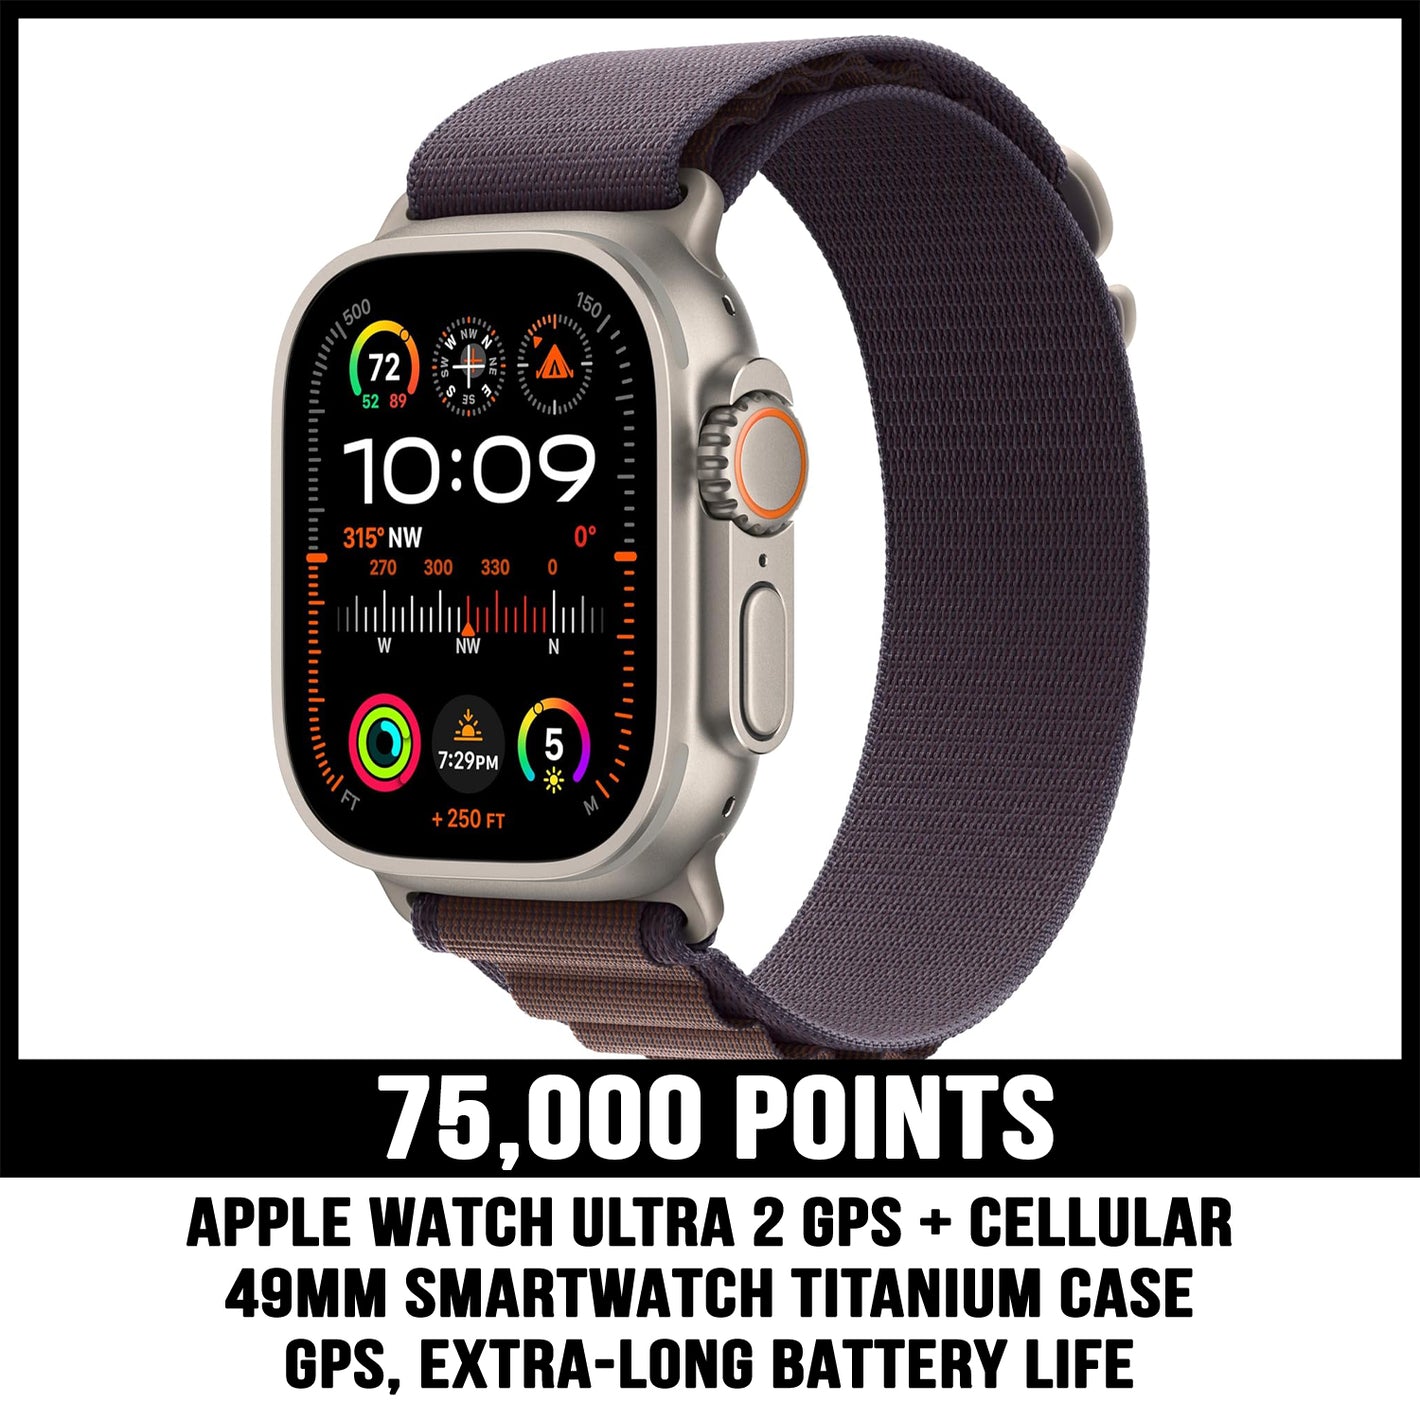 Apple Watch Ultra 2 prize for 75000 points